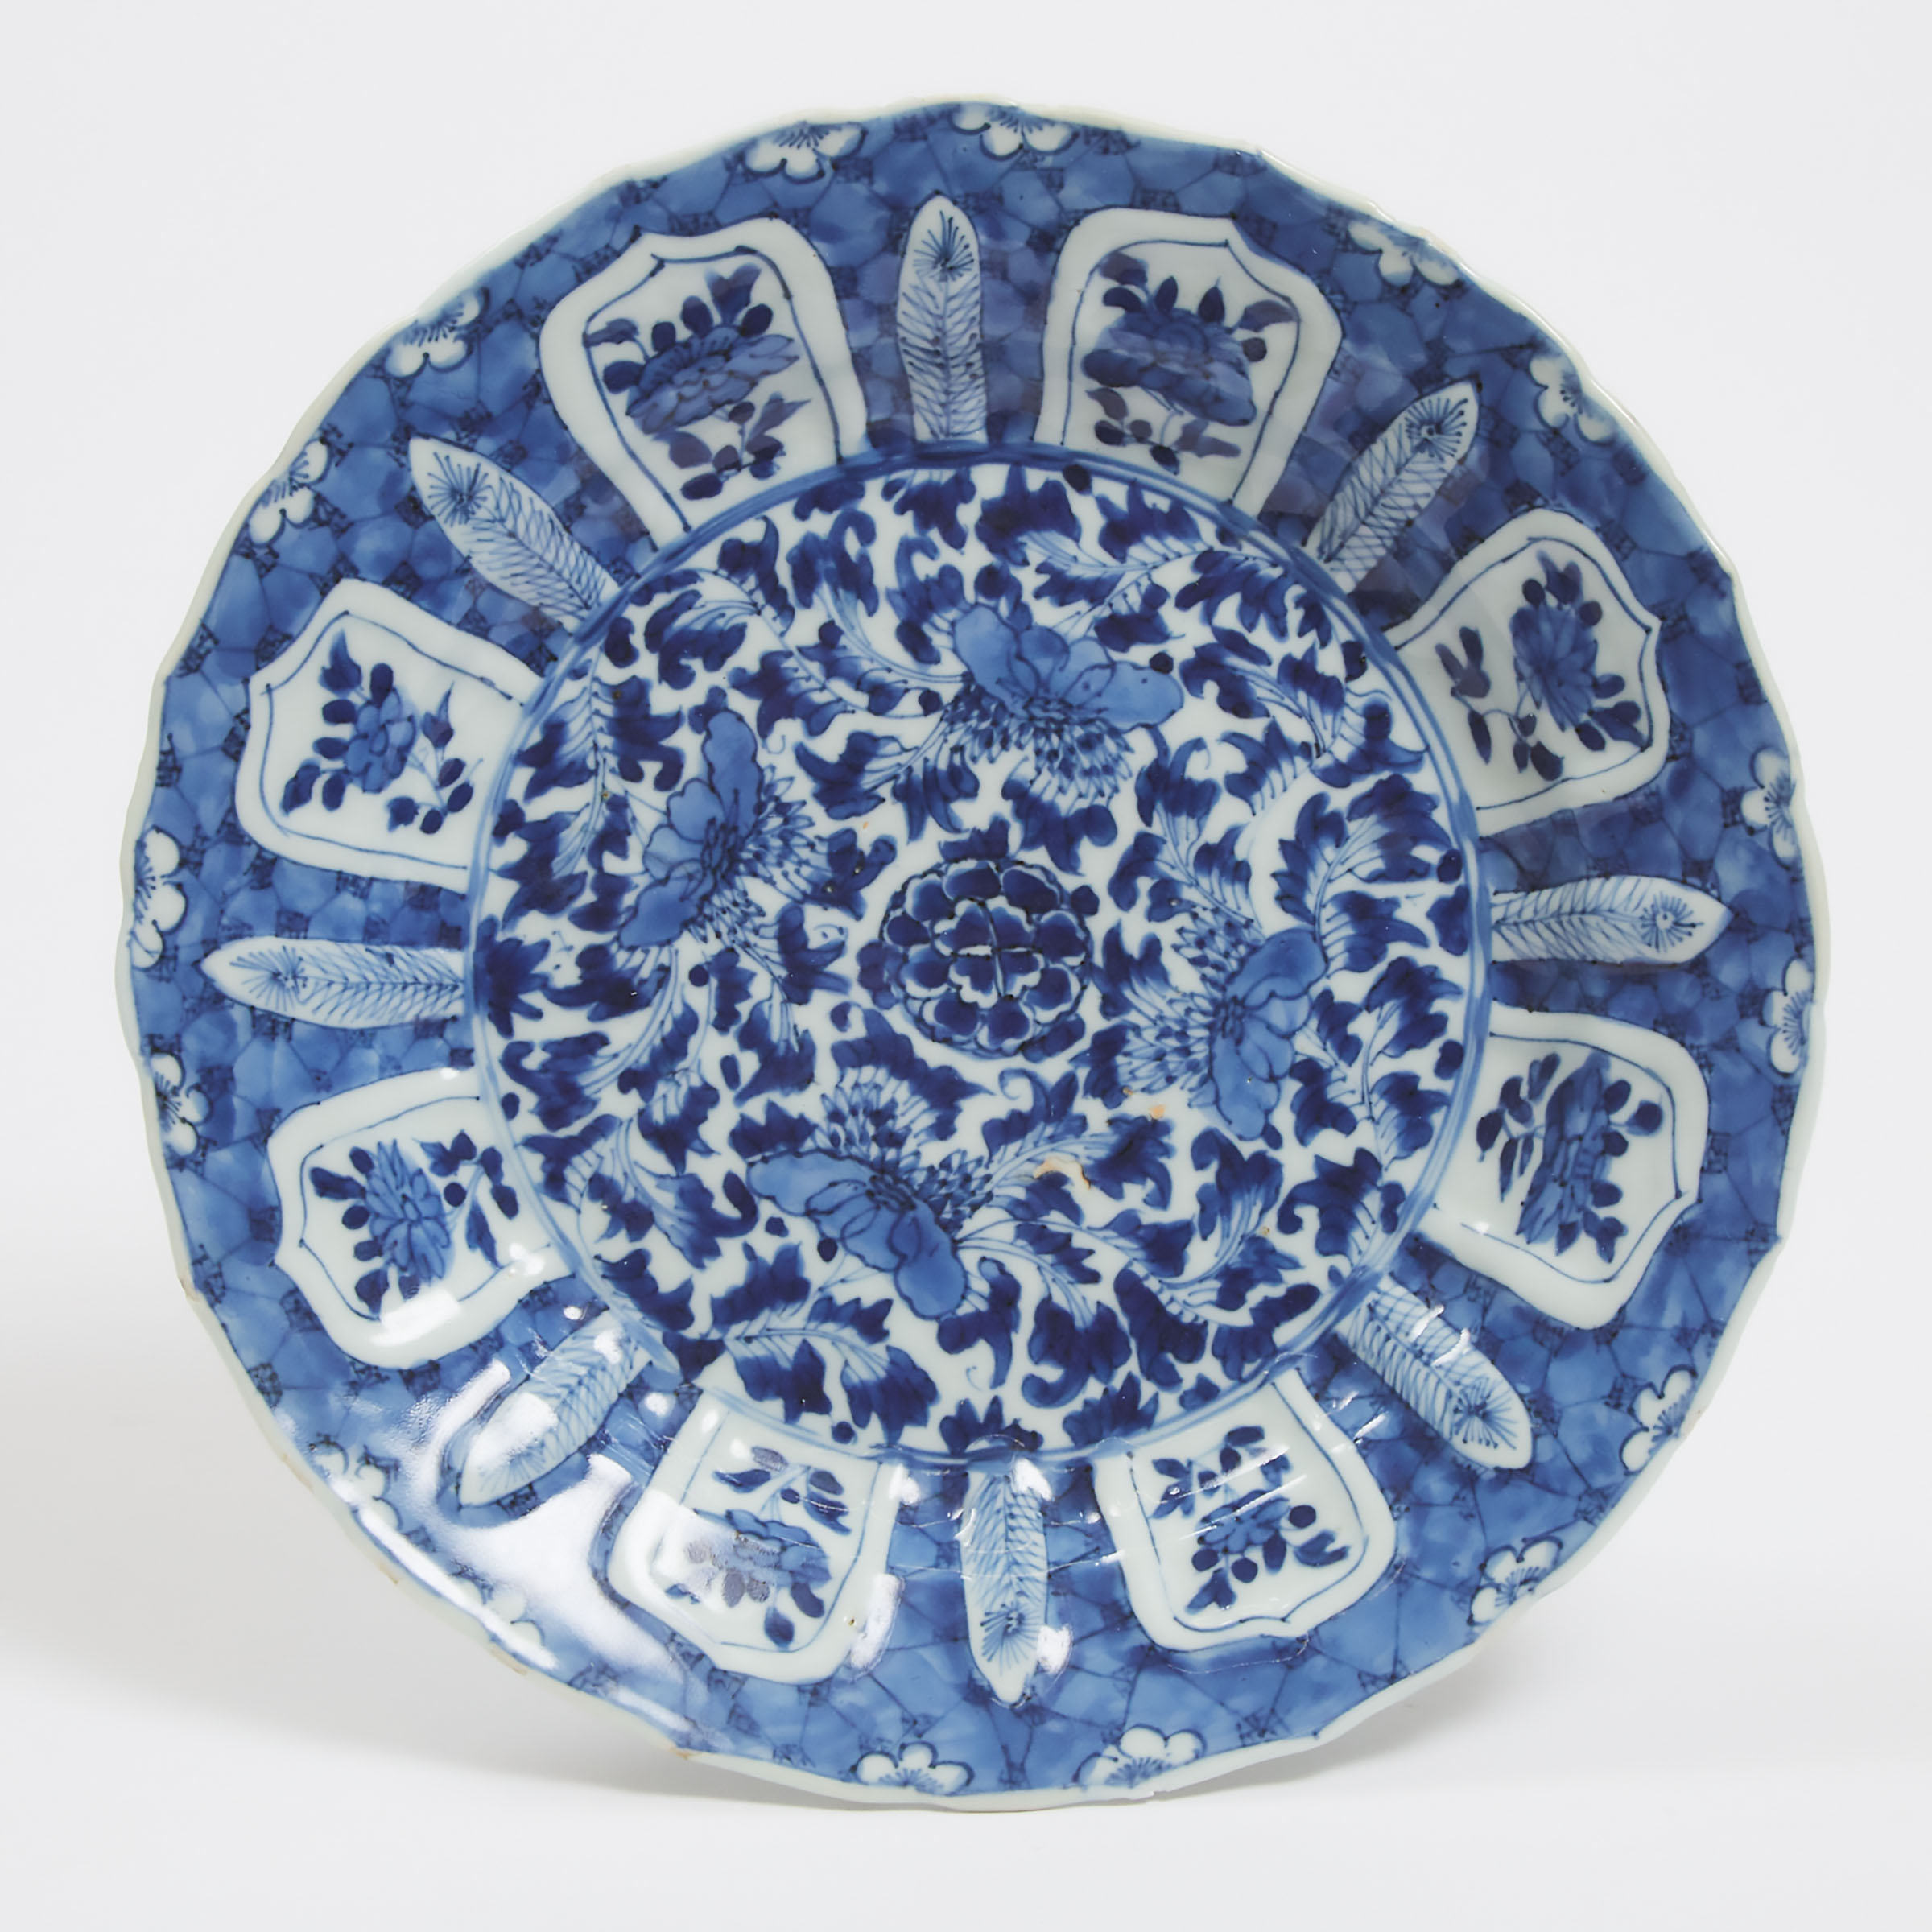 A Moulded Blue and White Barbed-Rim